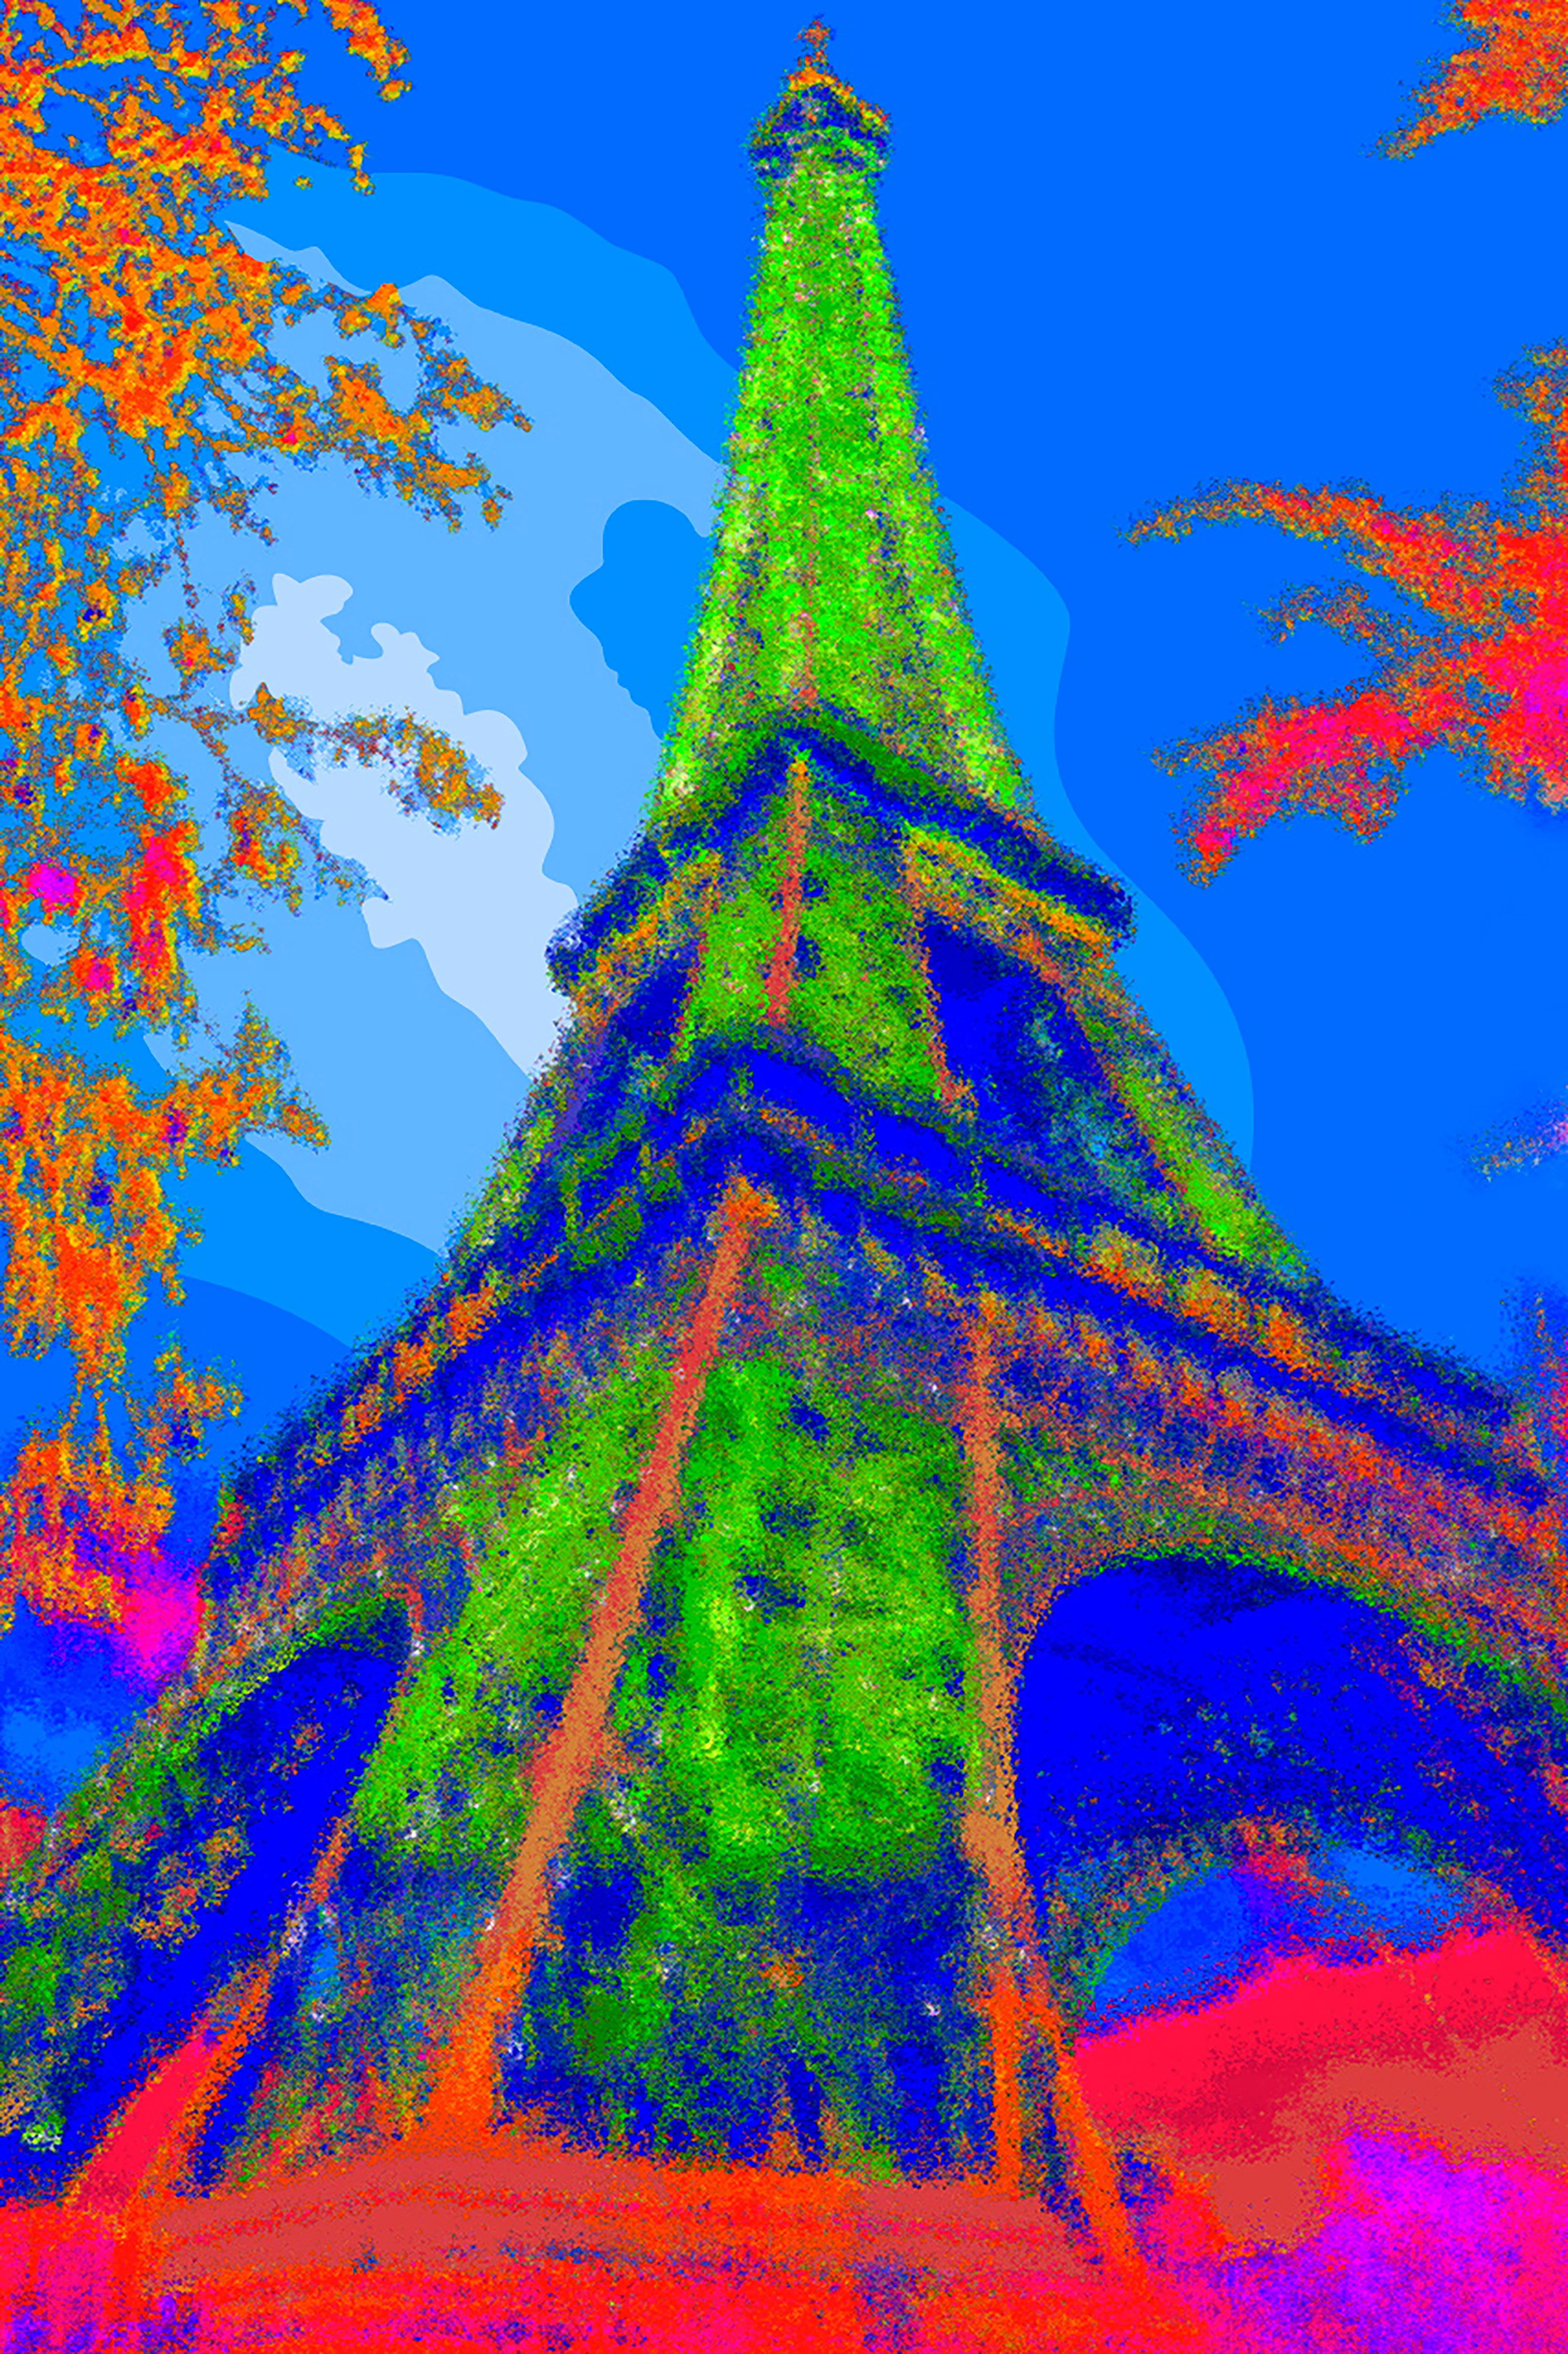 Francis APESTÉGUY - Eiffel Tower  
2007 
Format A2 (40x60cm)  
Digital print from an original photo taken by the artist, inkjet on baryta paper  
Signed and numbered on 9 copies  
Box  
350 euros 